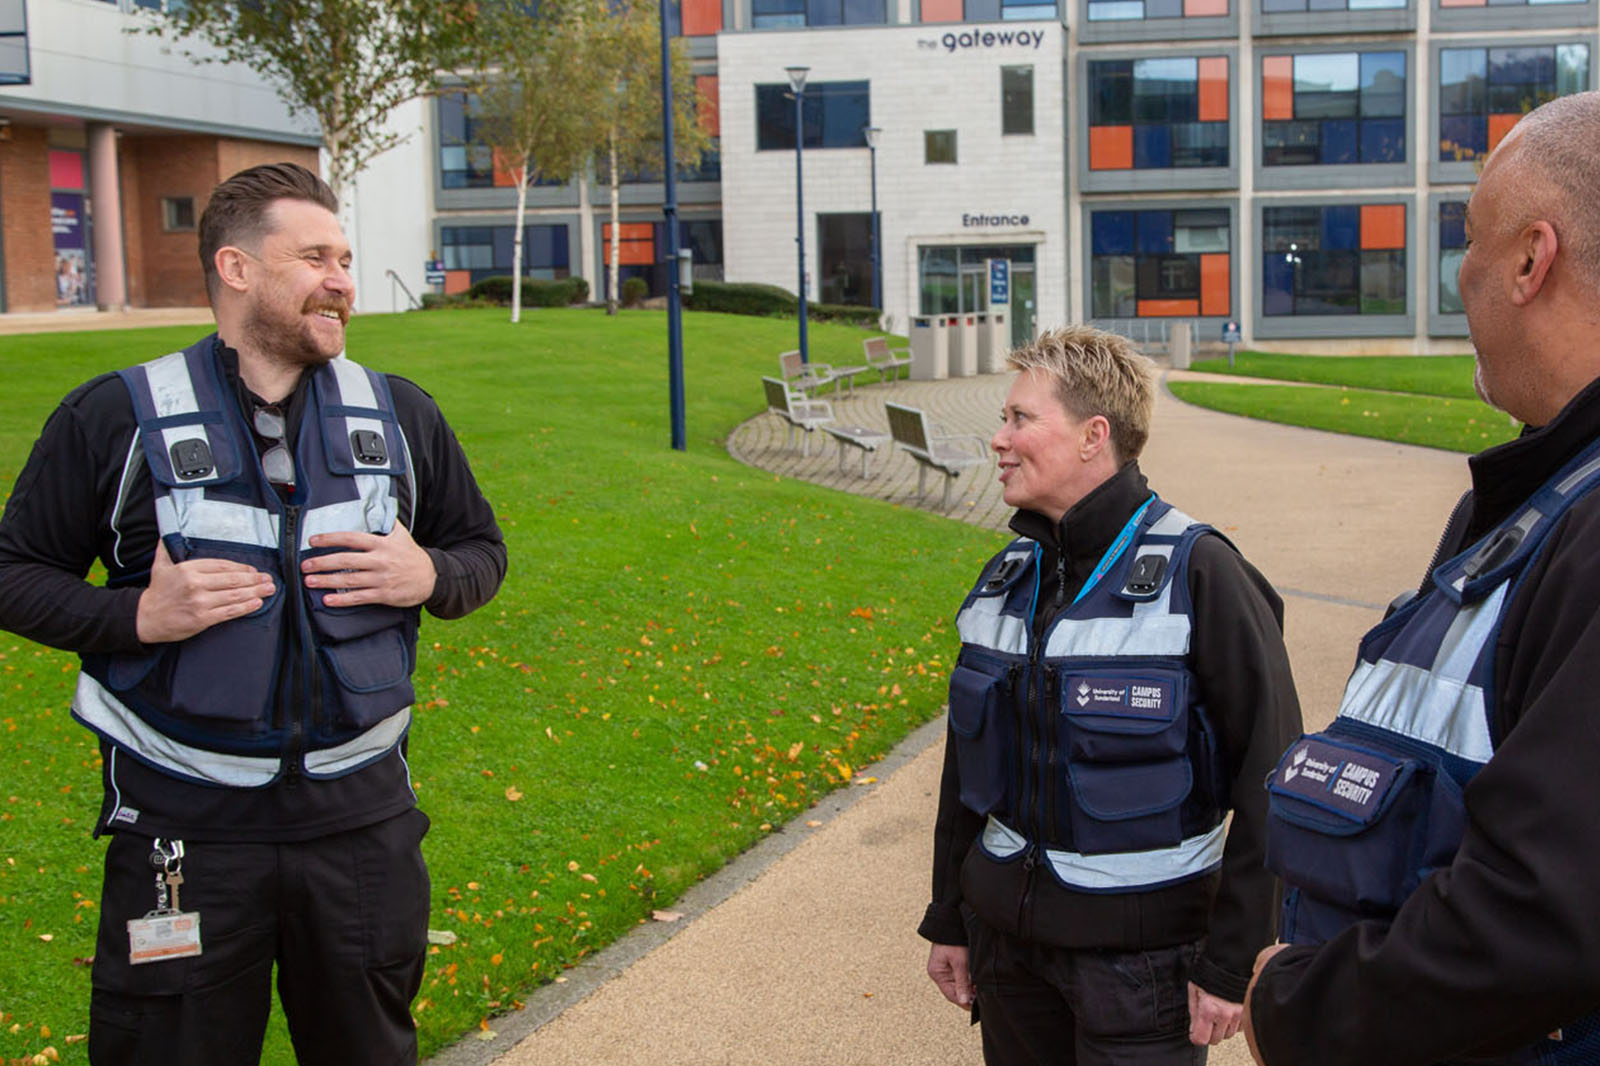 The University Security team in uniform talking and laughing on campus